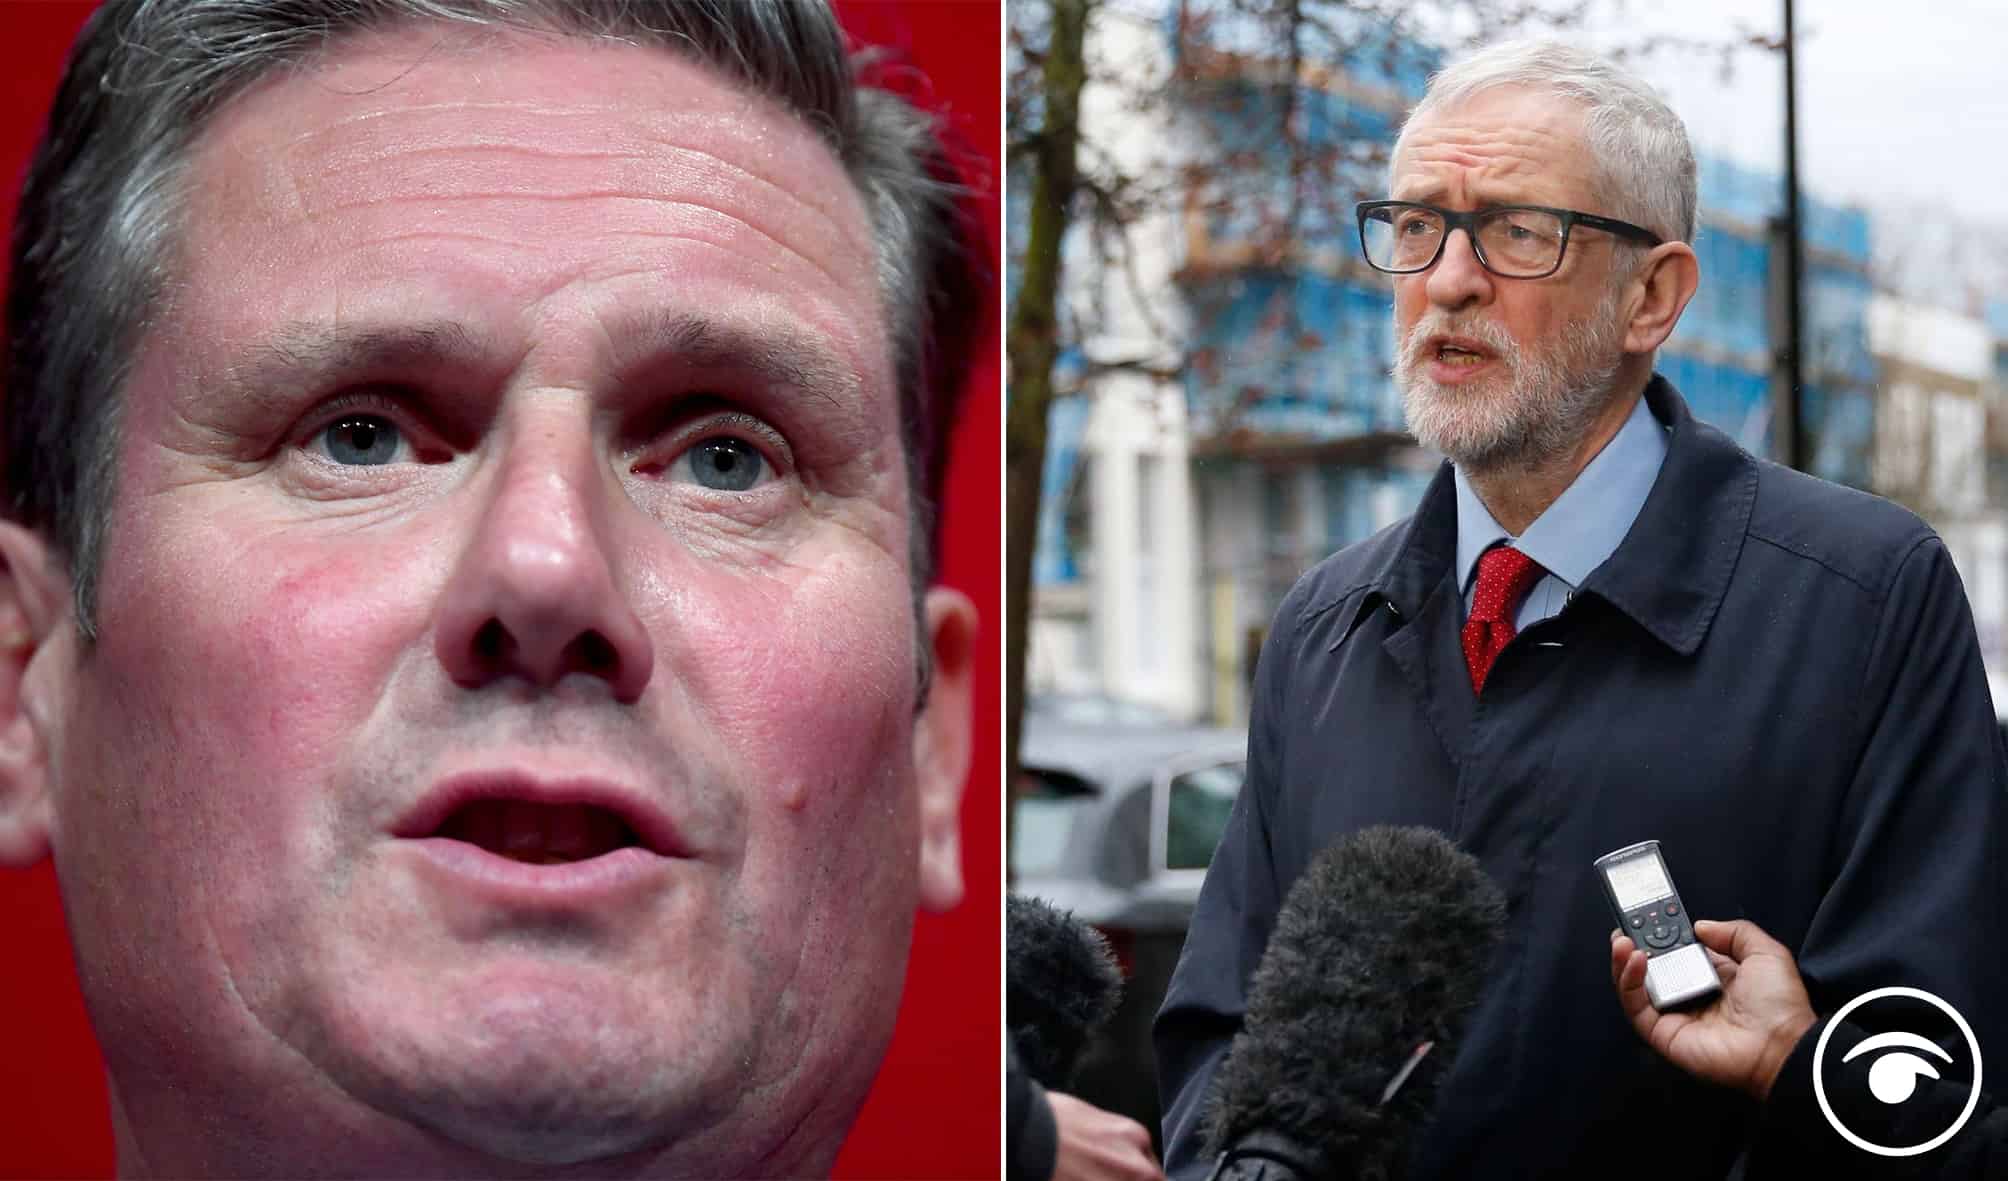 ‘Bring Jeremy back’: Voters in Bassetlaw react to Starmer’s speech